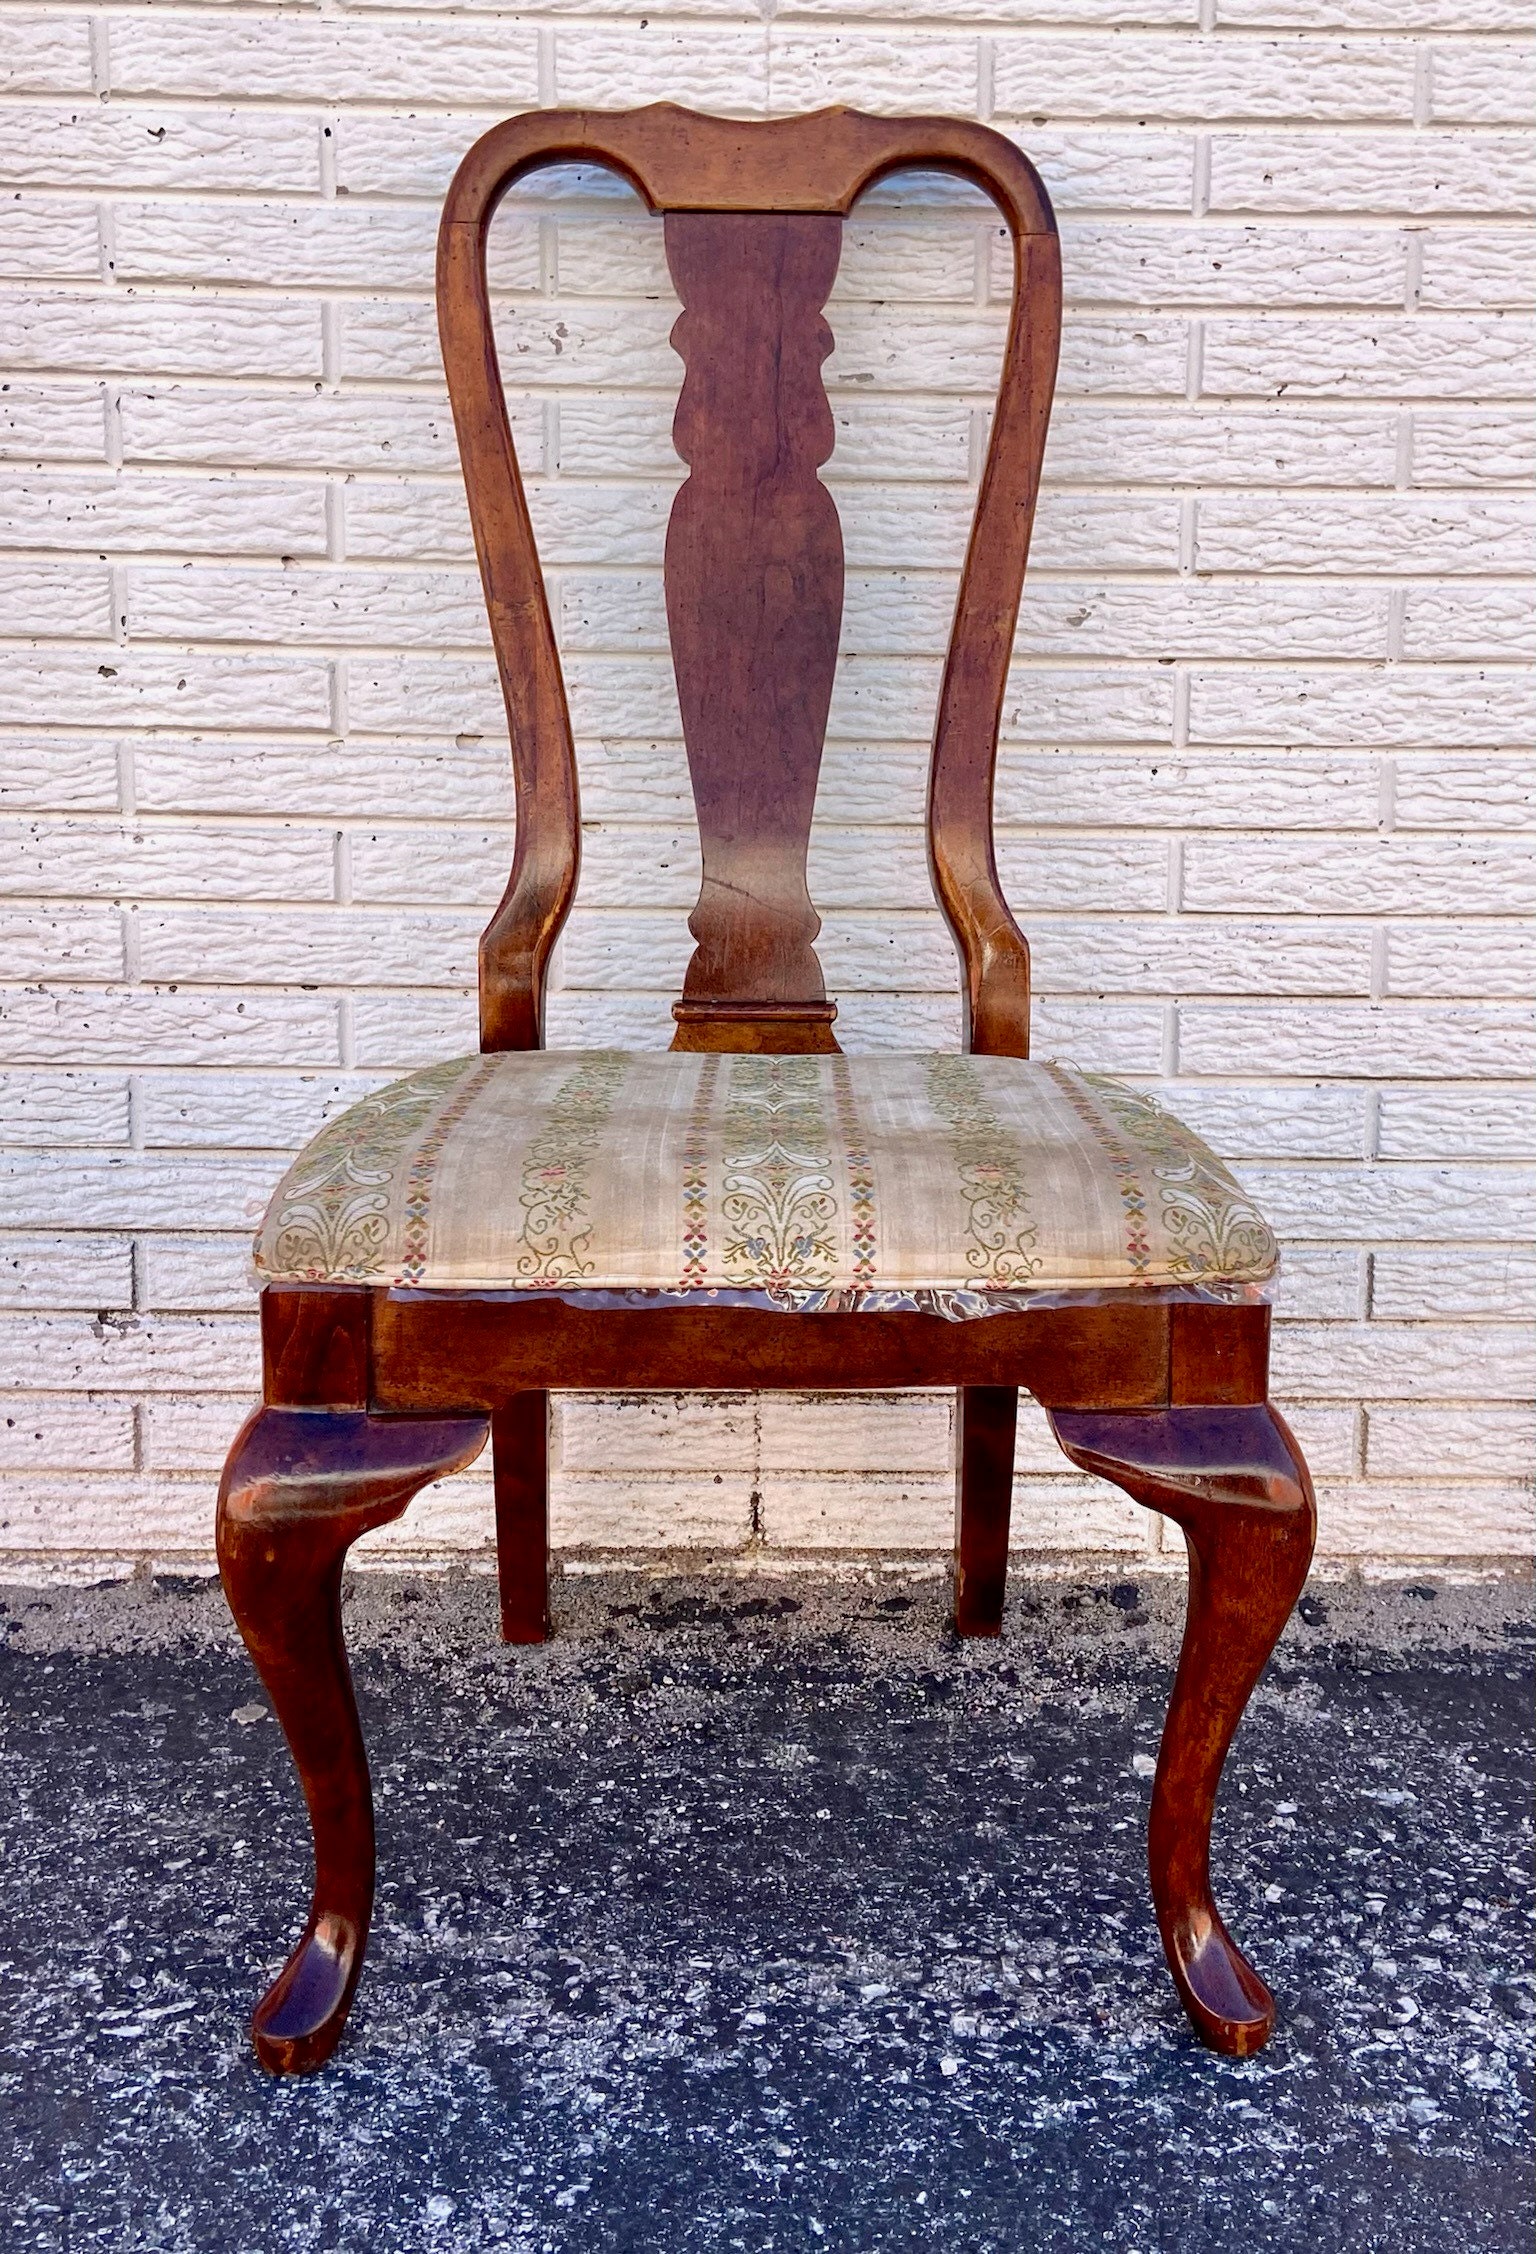 1980s Vintage Arts & Crafts Queen Anne Thomasville Maple Open Arm Side Chair  in Flame Stitch Upholstery